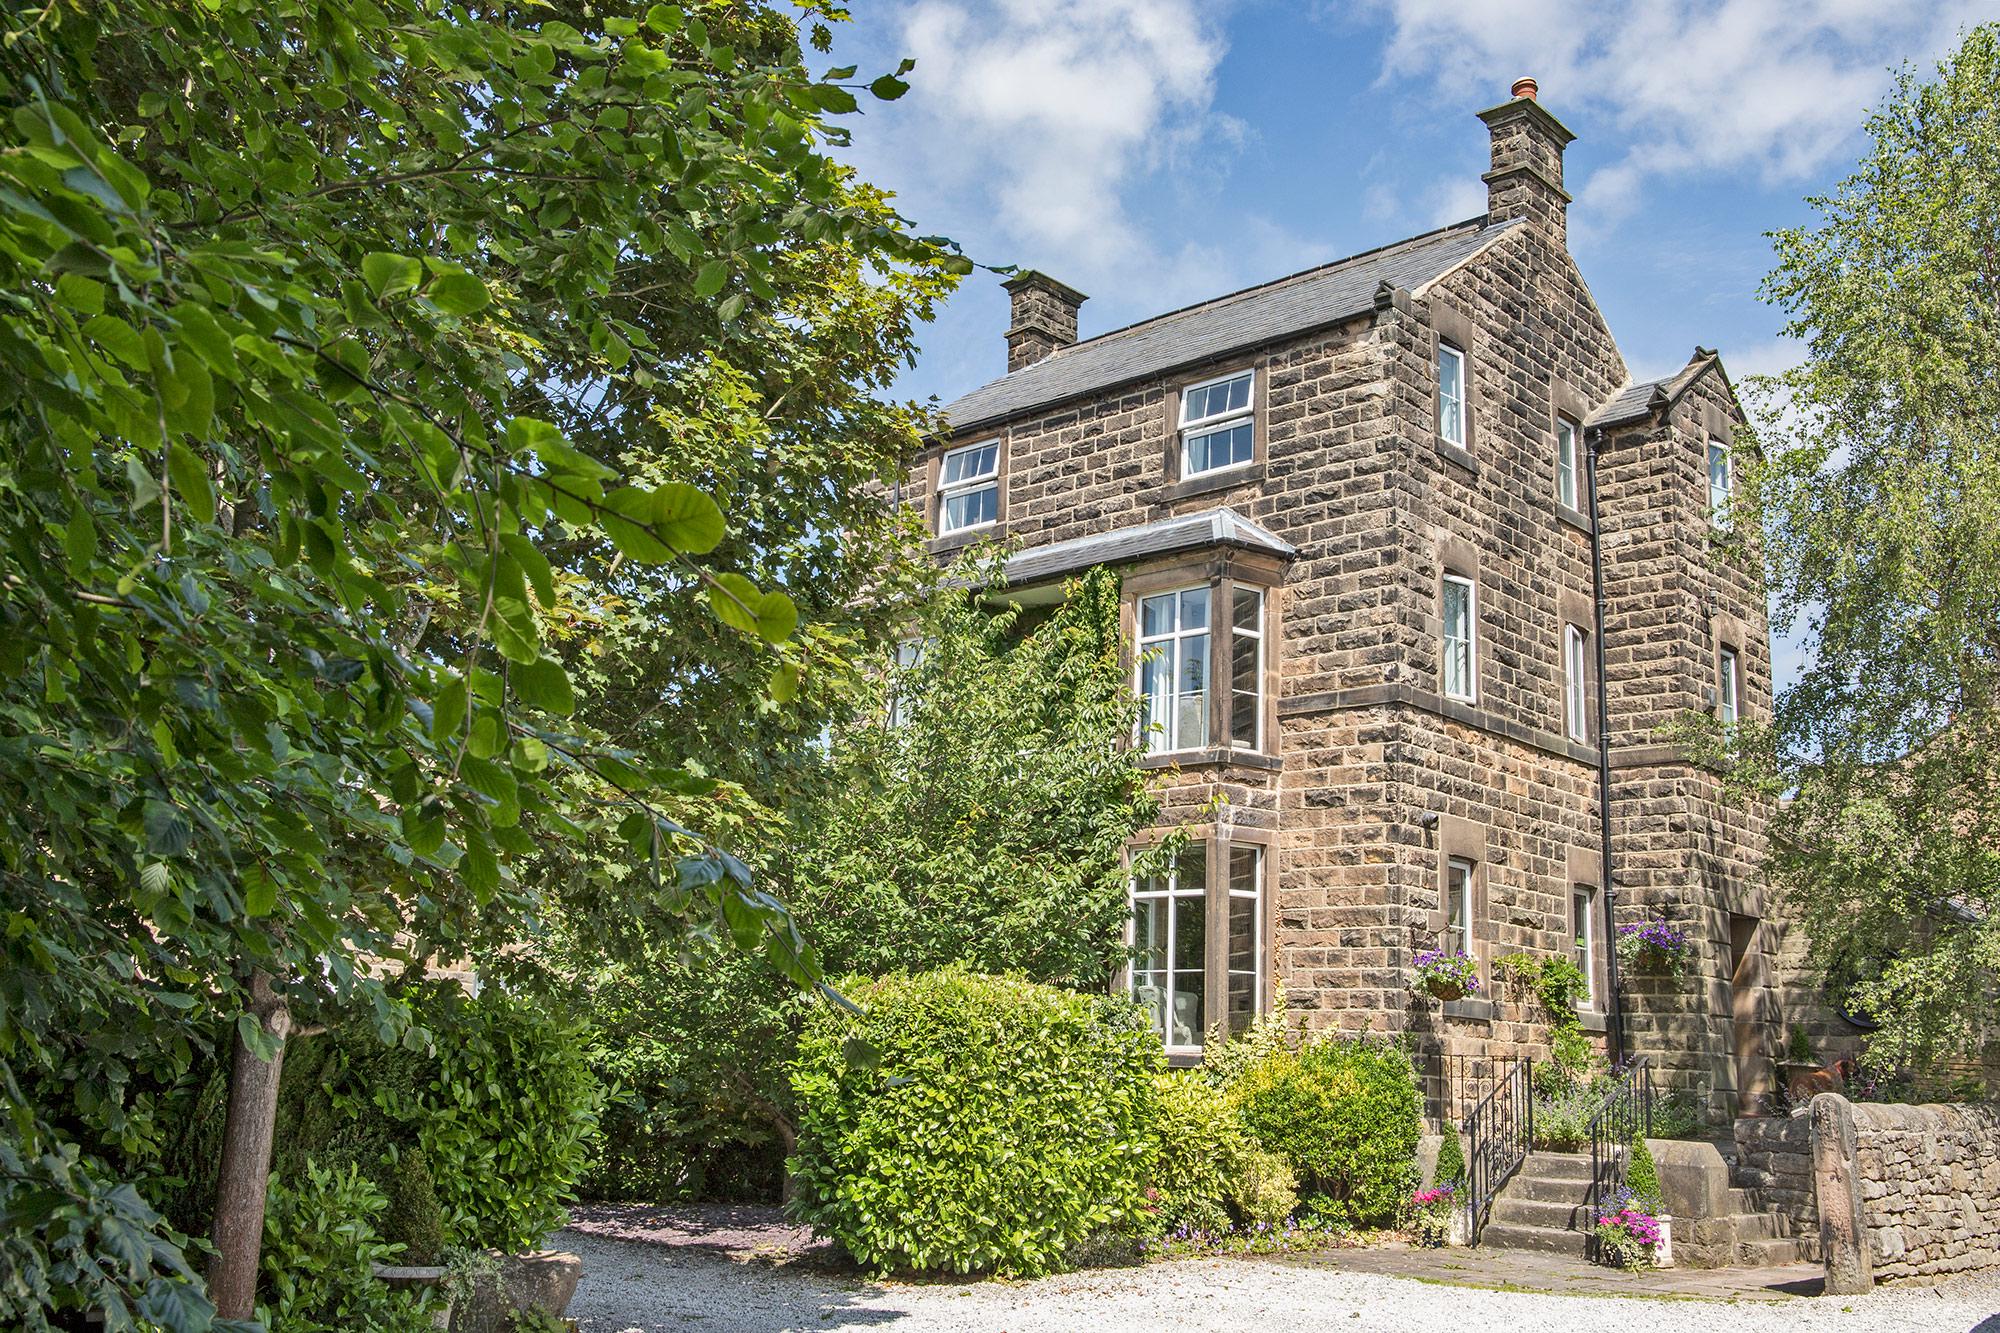 B&Bs in Matlock holidays at Cool Places